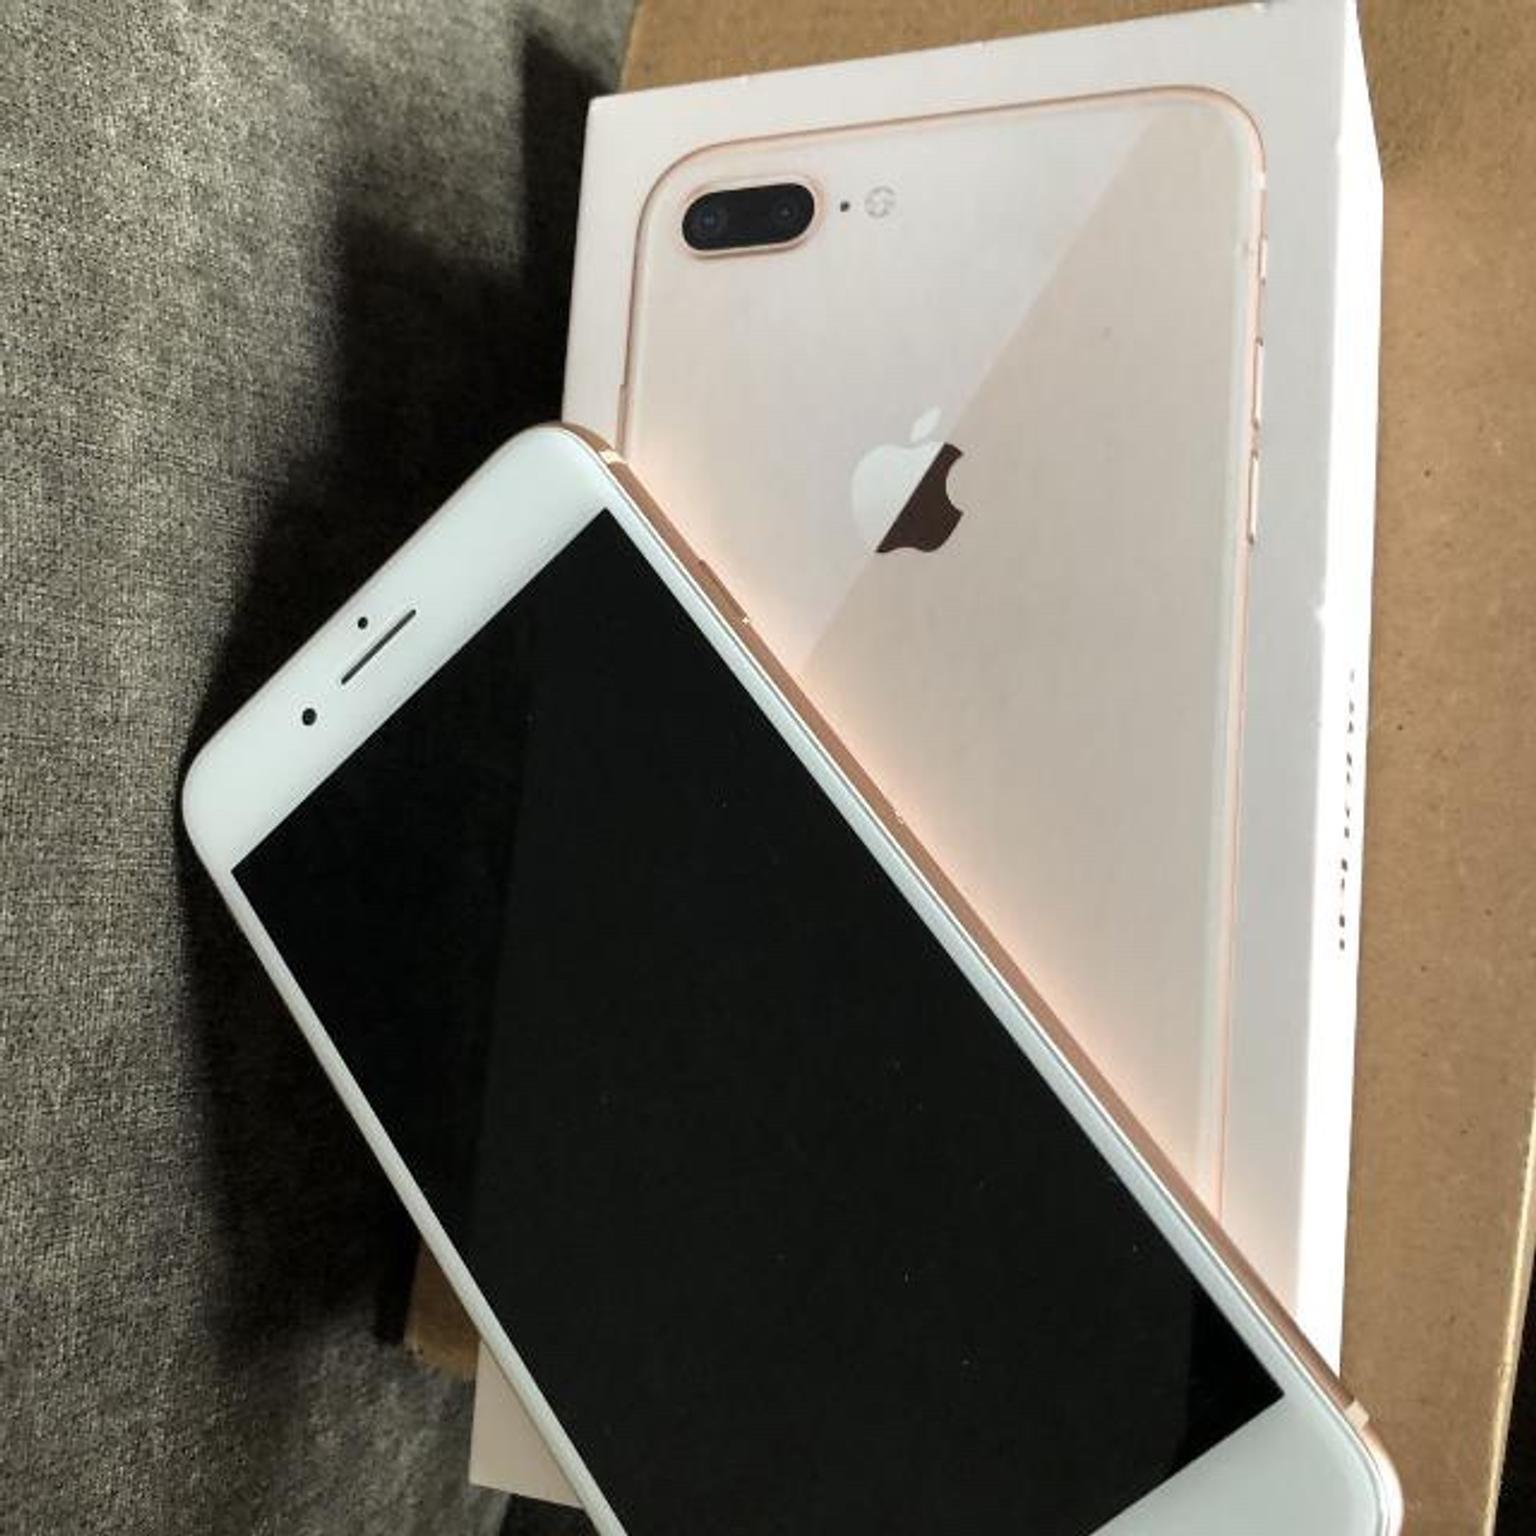 IPHONE 8 plus 256GB Gold rose BRAND NEW in WC2A Temple for £600.00 for